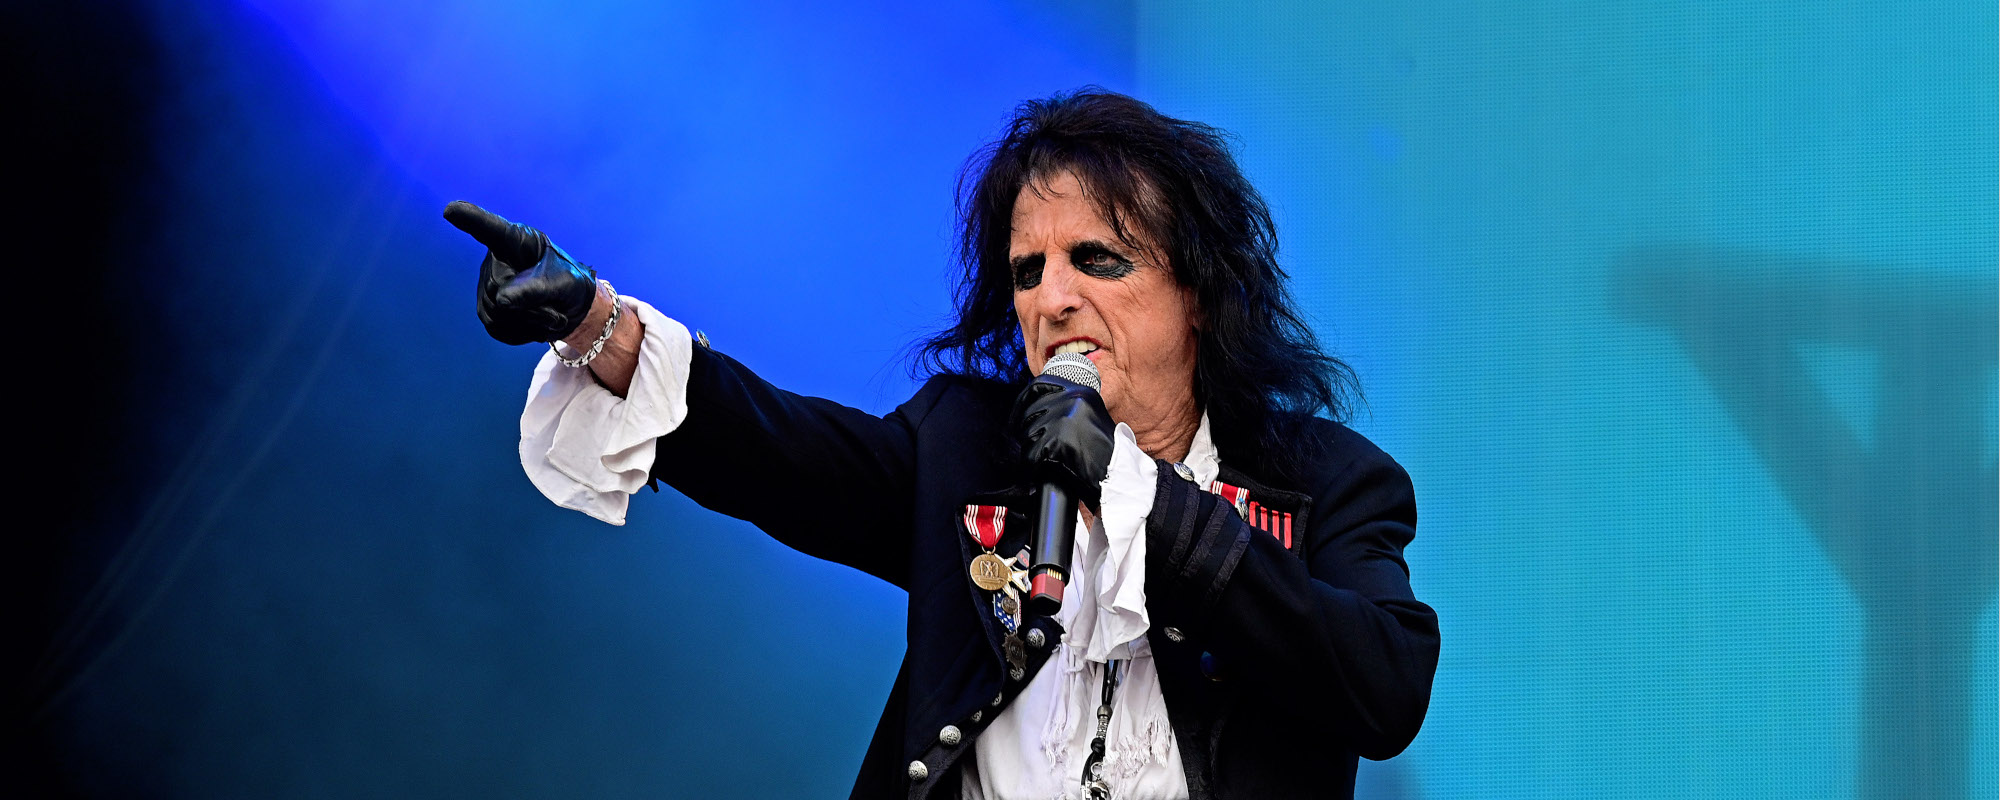 After Calling Trans People a “Fad,” Rocker Alice Cooper Dropped from Cosmetics Line